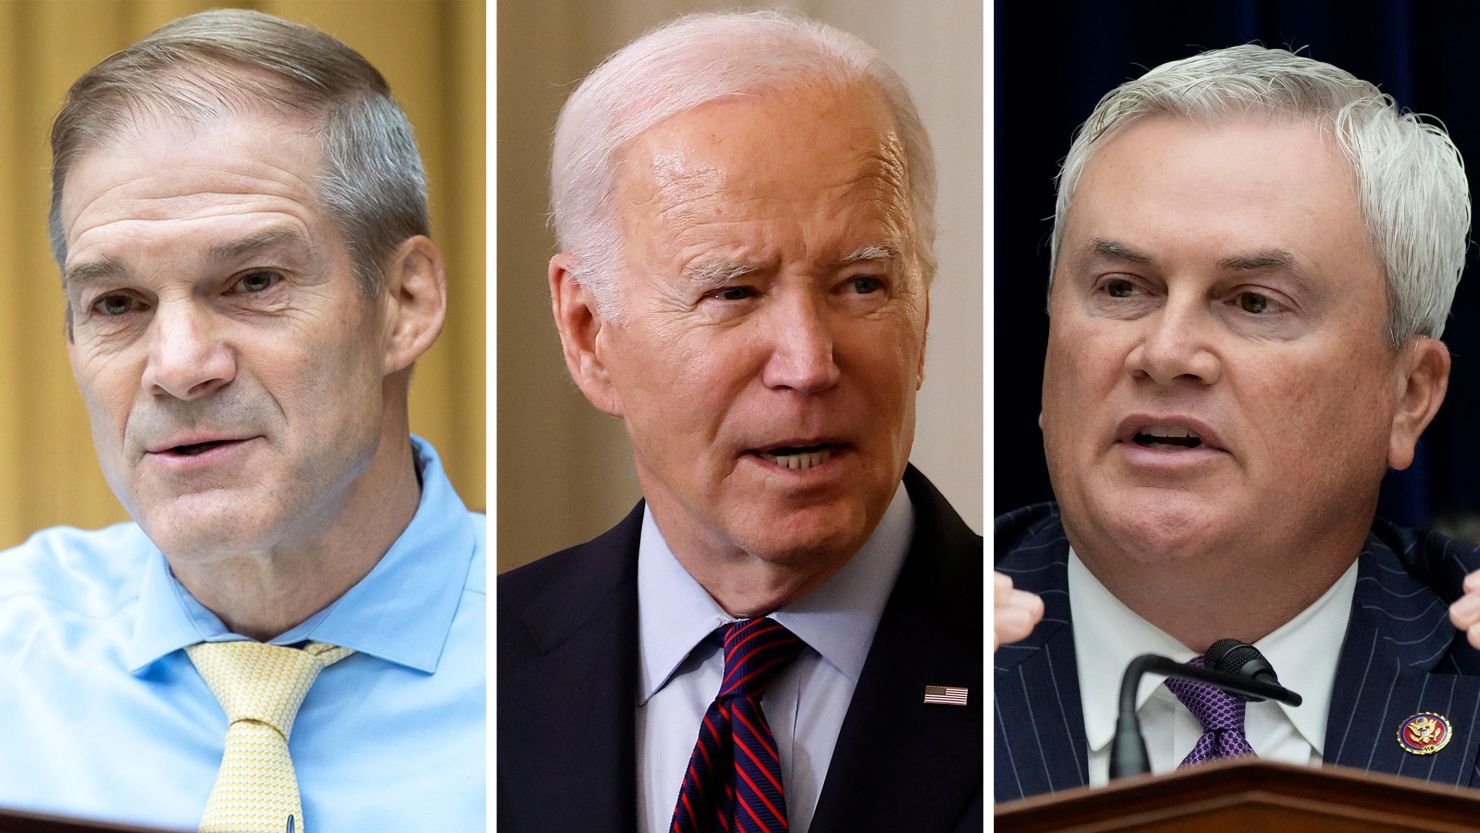 From left to right, Rep. Jim Jordan, President Joe Biden and Rep. James Comer are pictured.